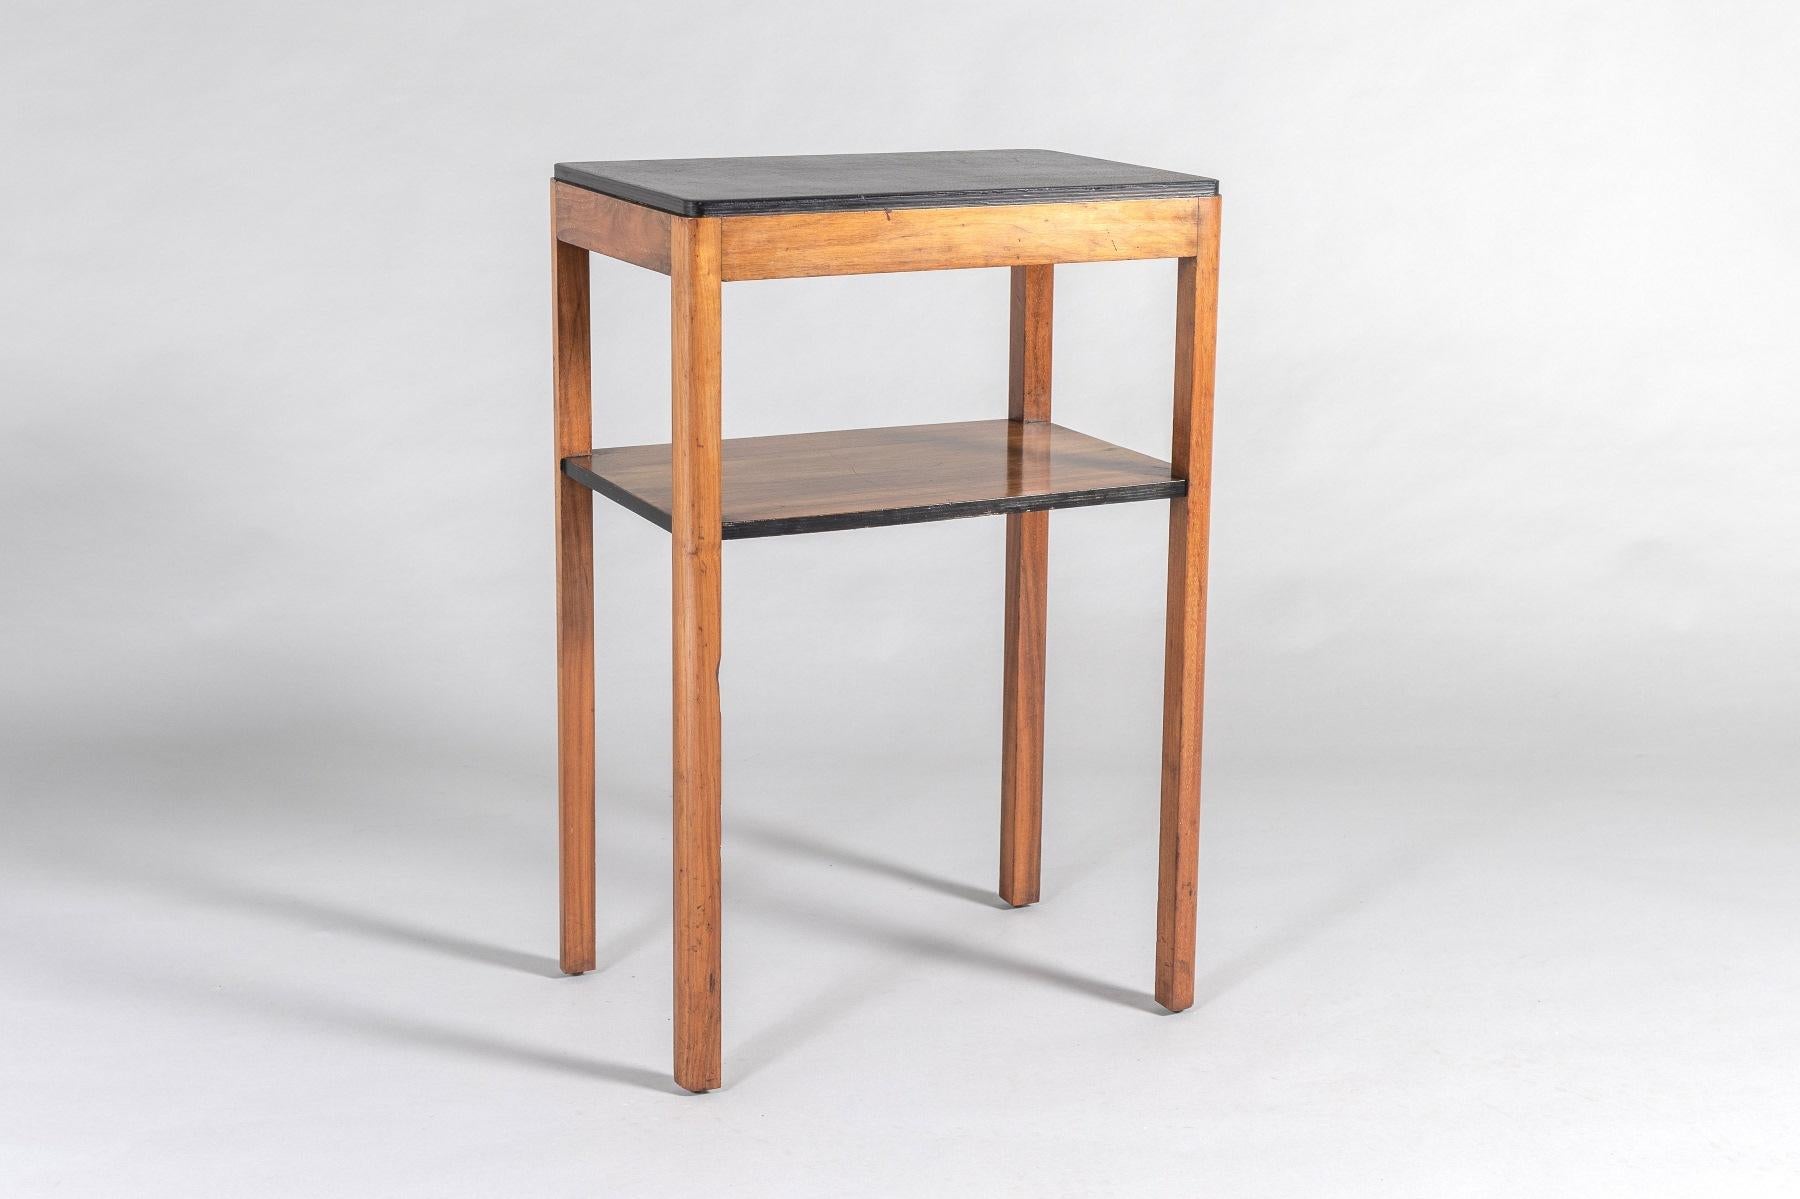 A very classy 1960s Mid Century Side table in Walnut and Birch.  An original piece that has that essential high-end 60s/70s look. a superb warm colour tome with just the right amount of wear in its original finish. Walnut frame with veneered walnut